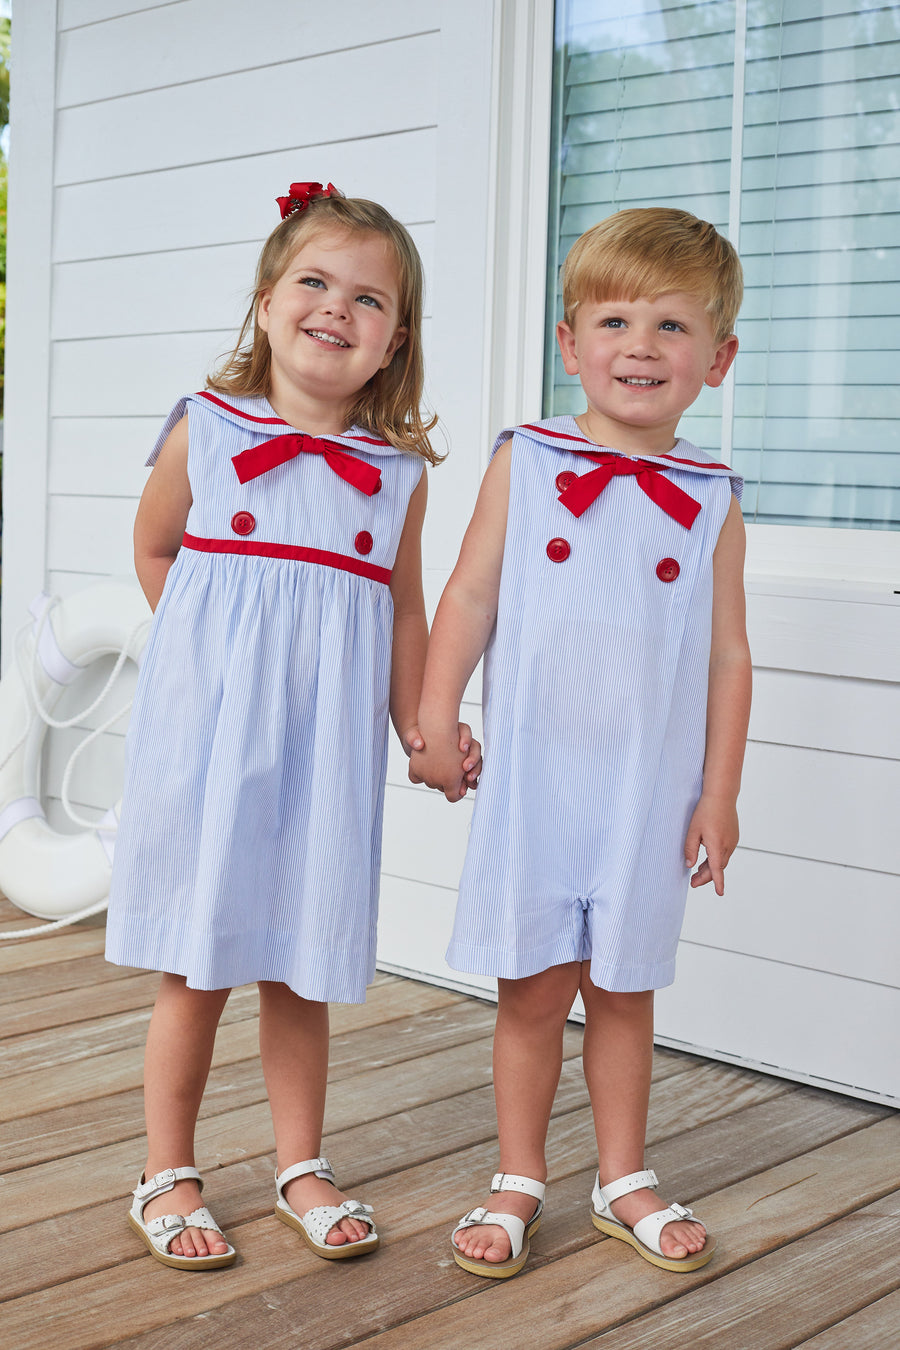 Little English traditional children's clothing, boy's classic thin light blue stripe john john with sailor collar, fixed neck tie, and red button detail for Summer